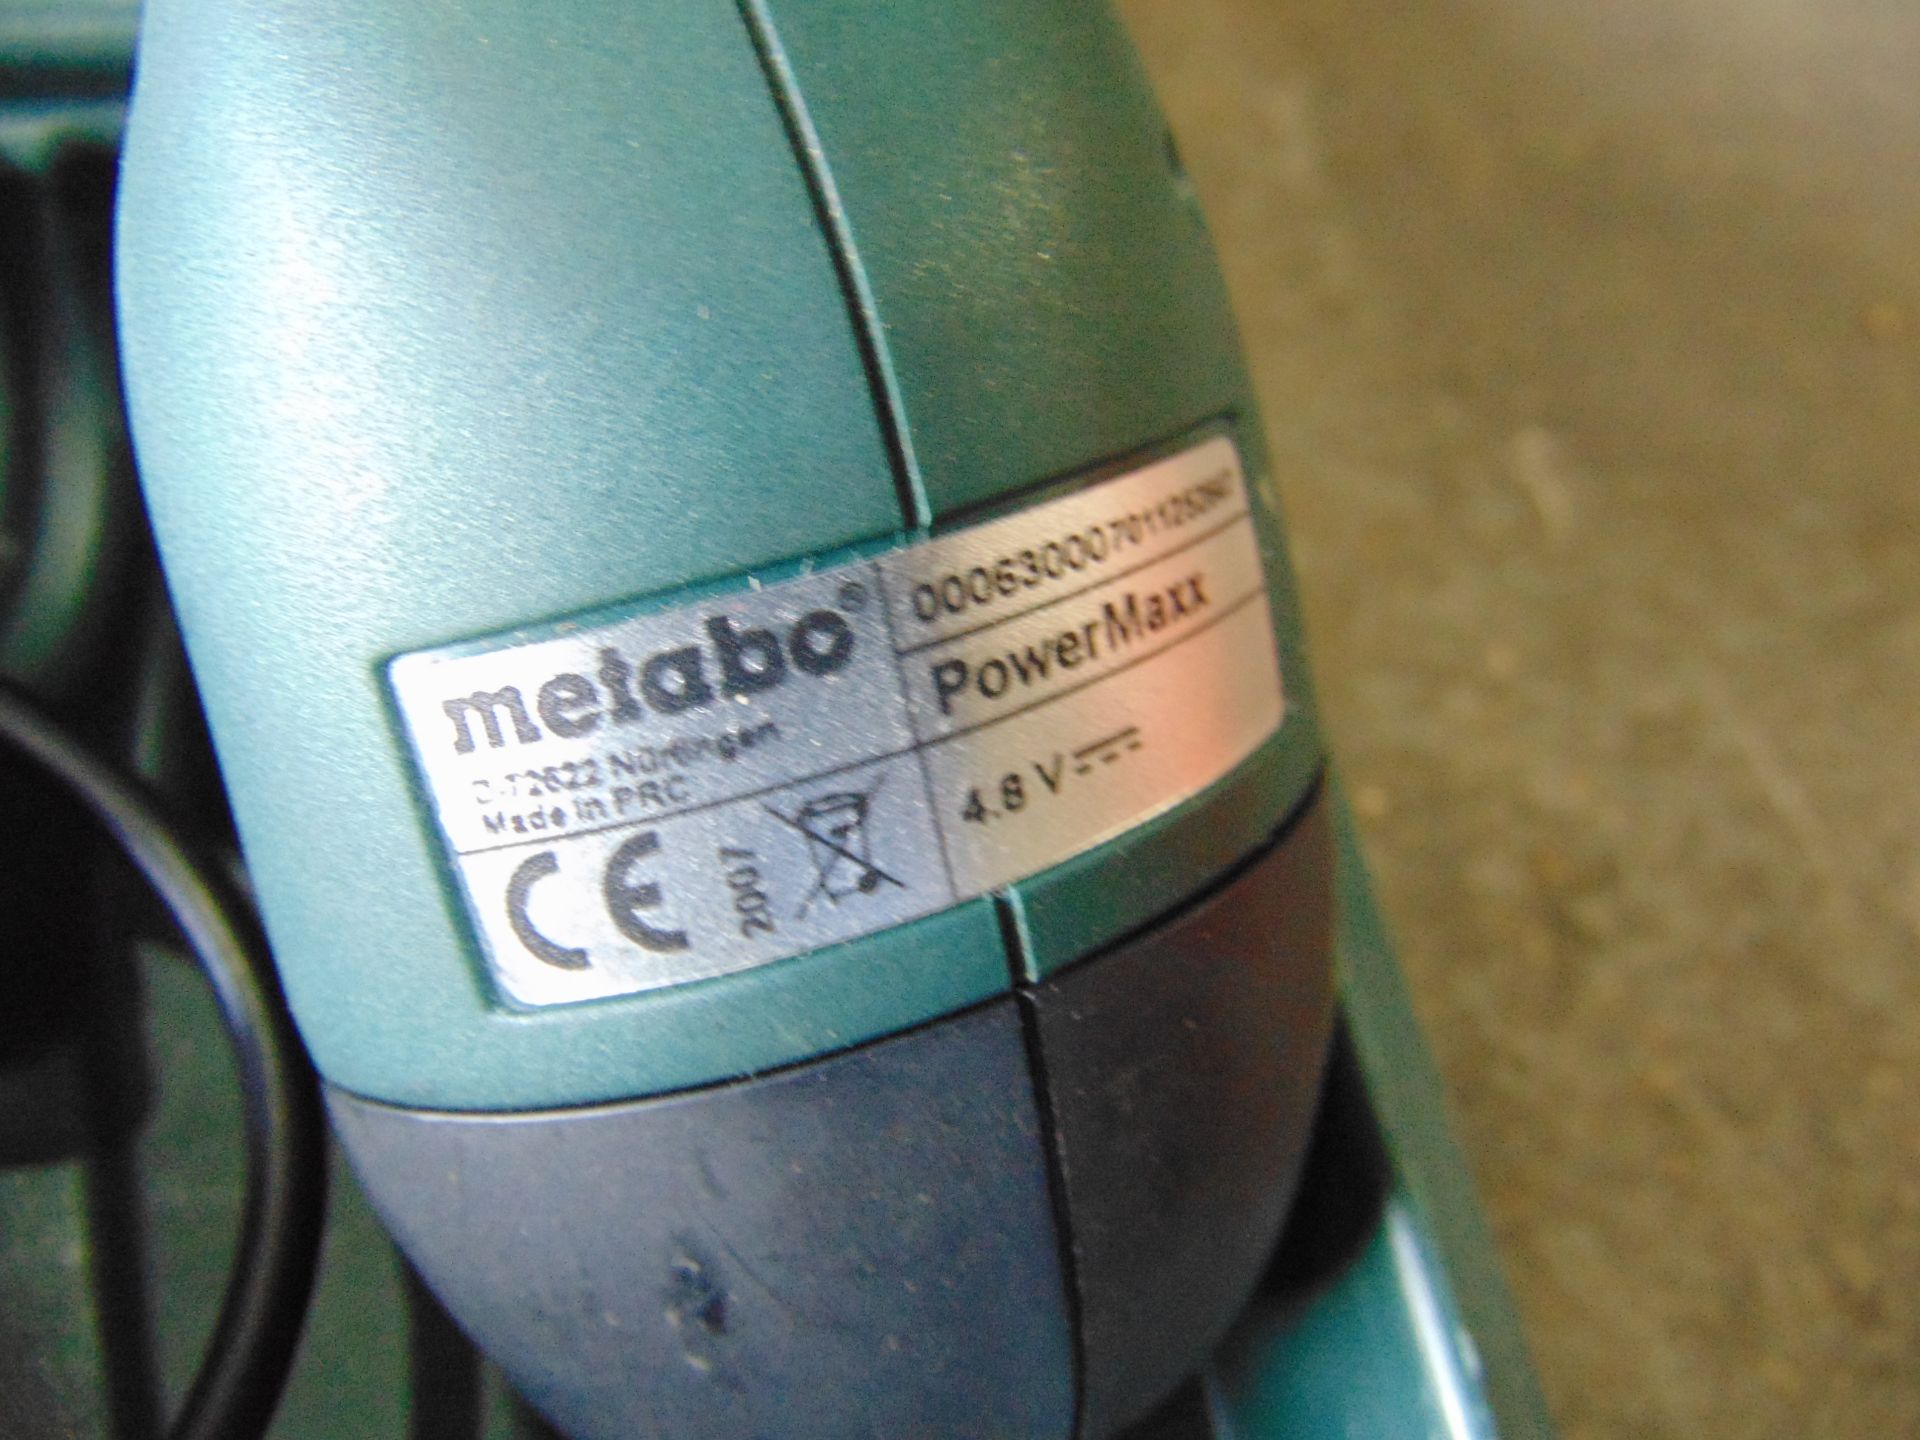 Metabo Powermaxx 4.8V Cordless Screwdriver C/W 2 x Batteries / Charger & Case - Image 5 of 6